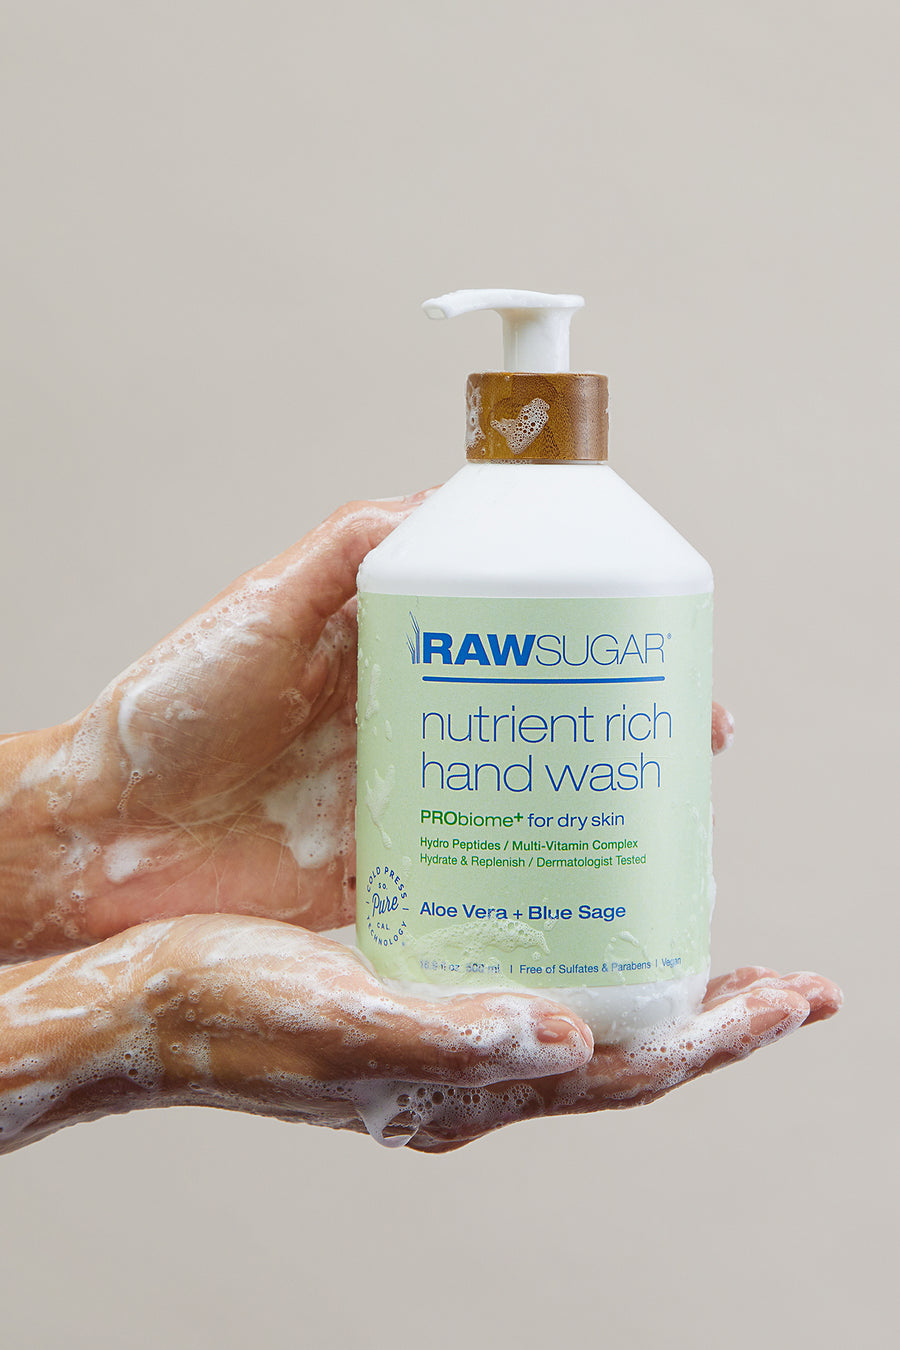 Sudsy Hands holding hand wash